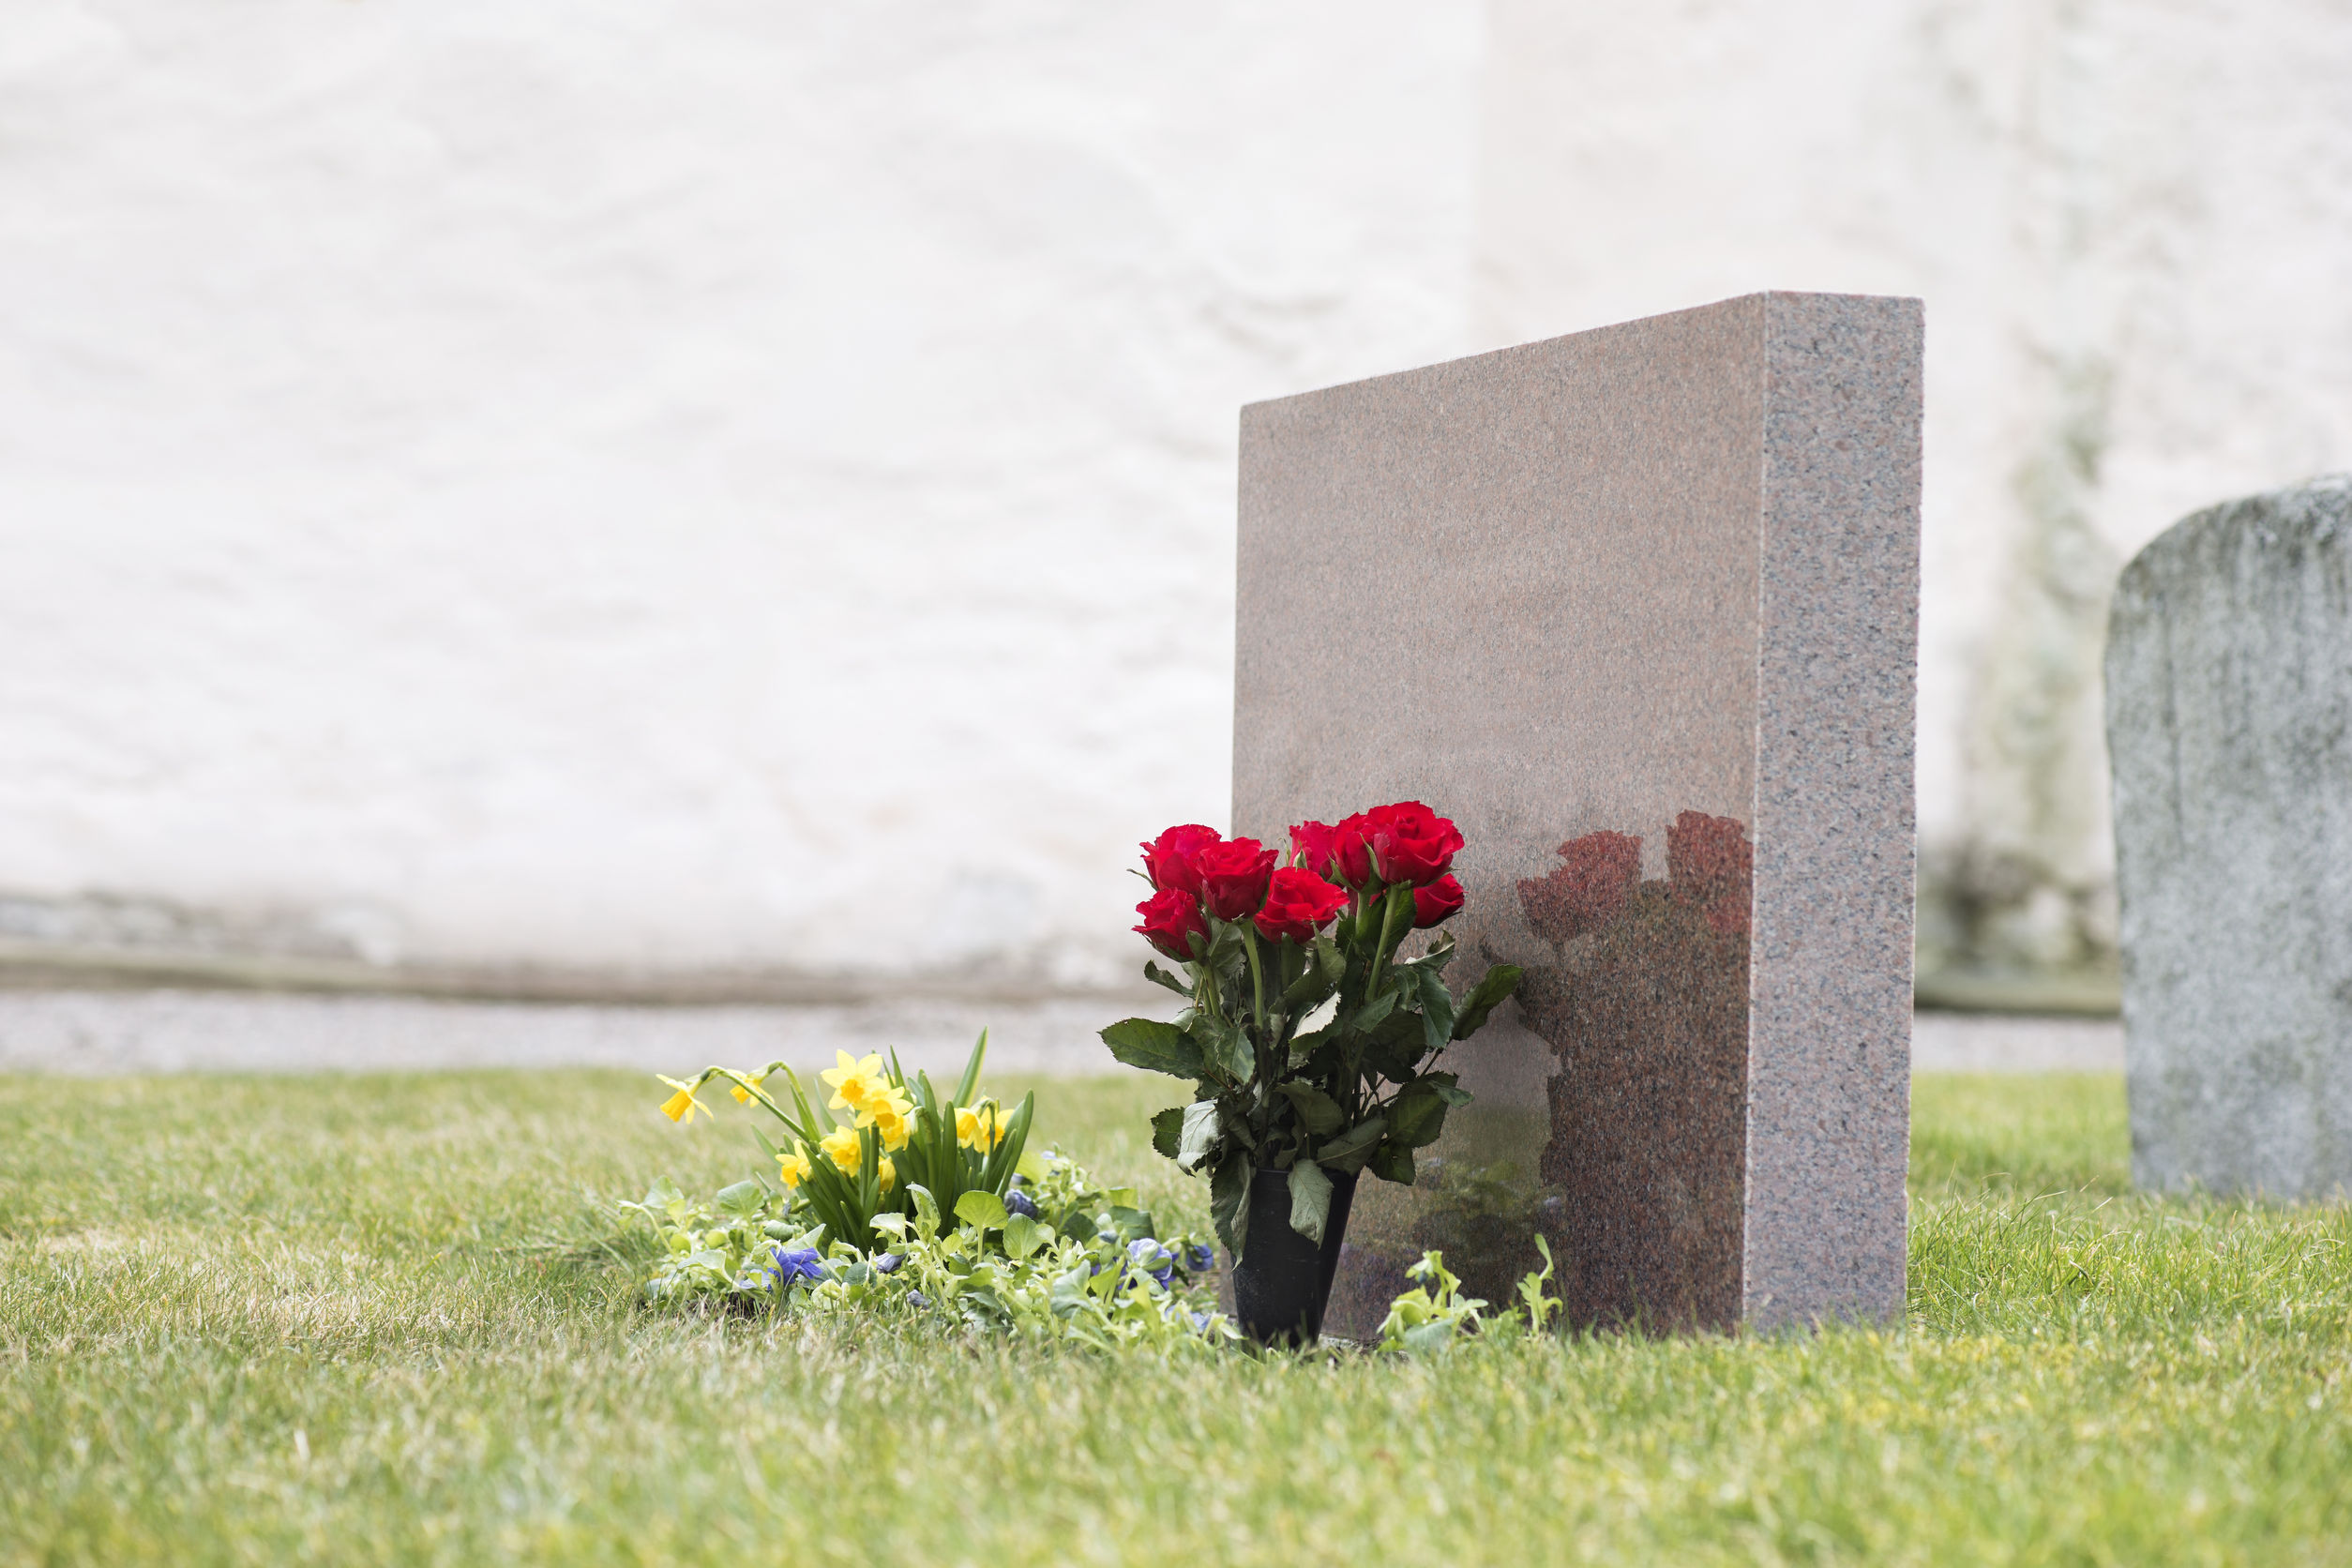 5 FAQs about Wrongful Death Cases in New York